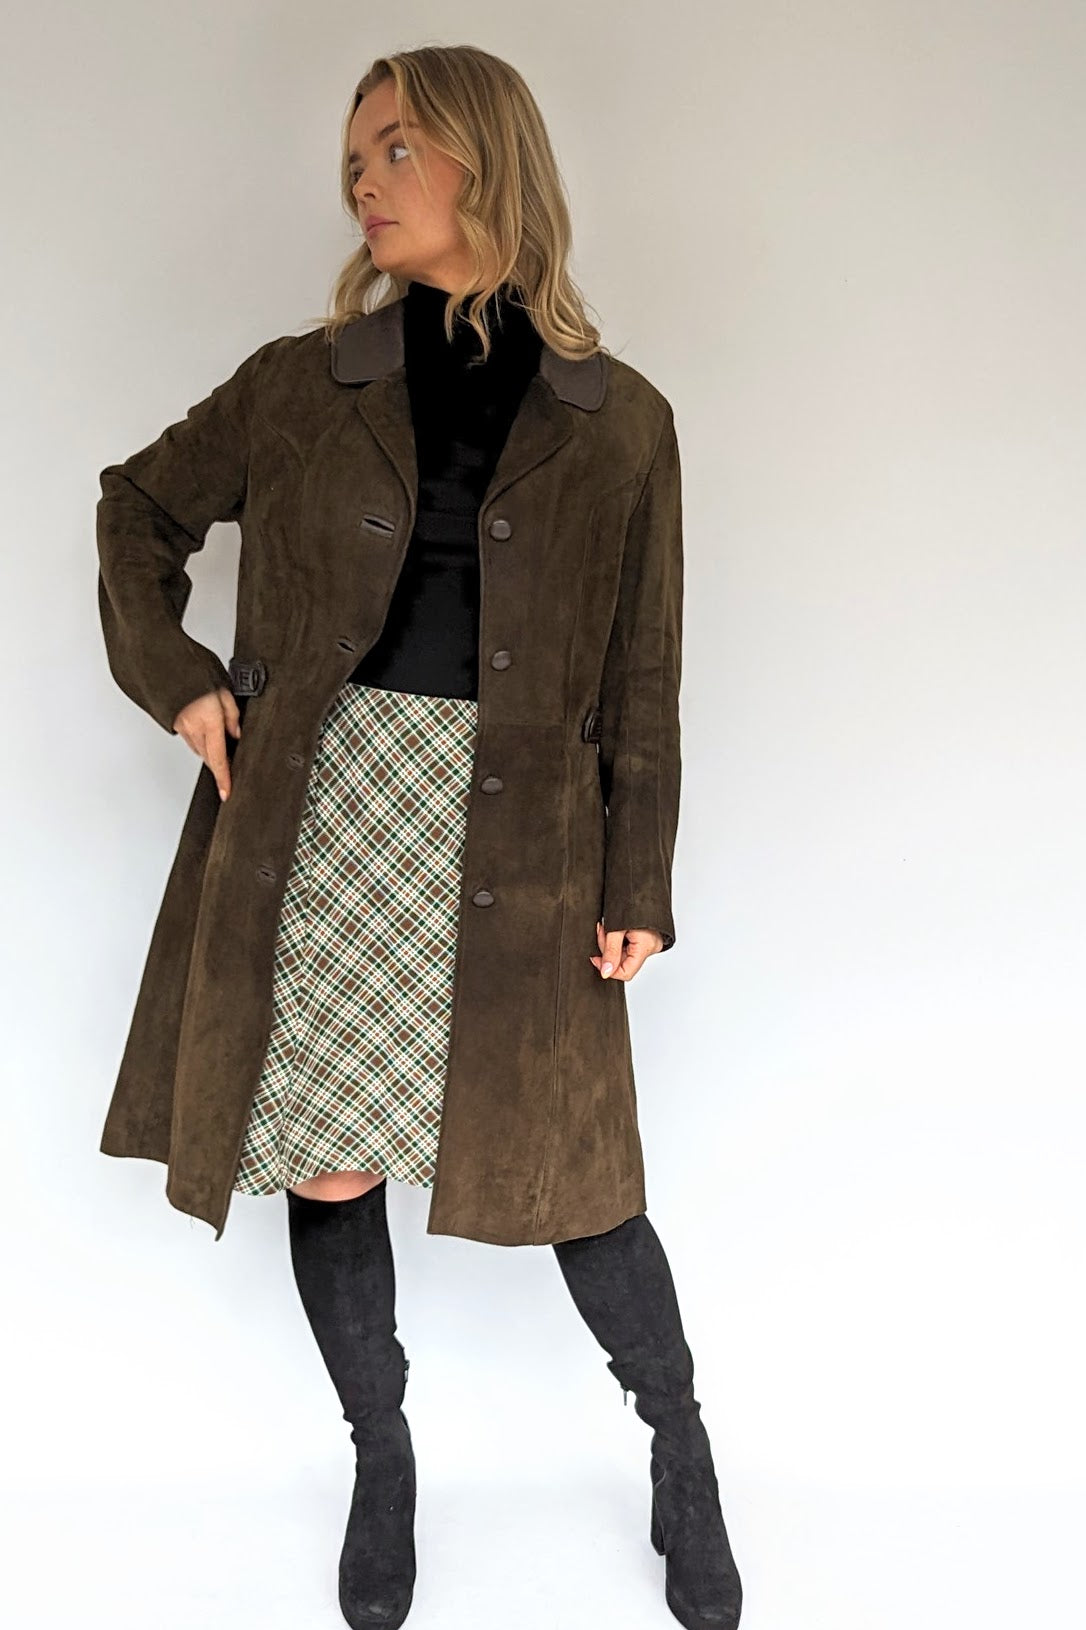 skirt with suede jacket from 1970s checked suit